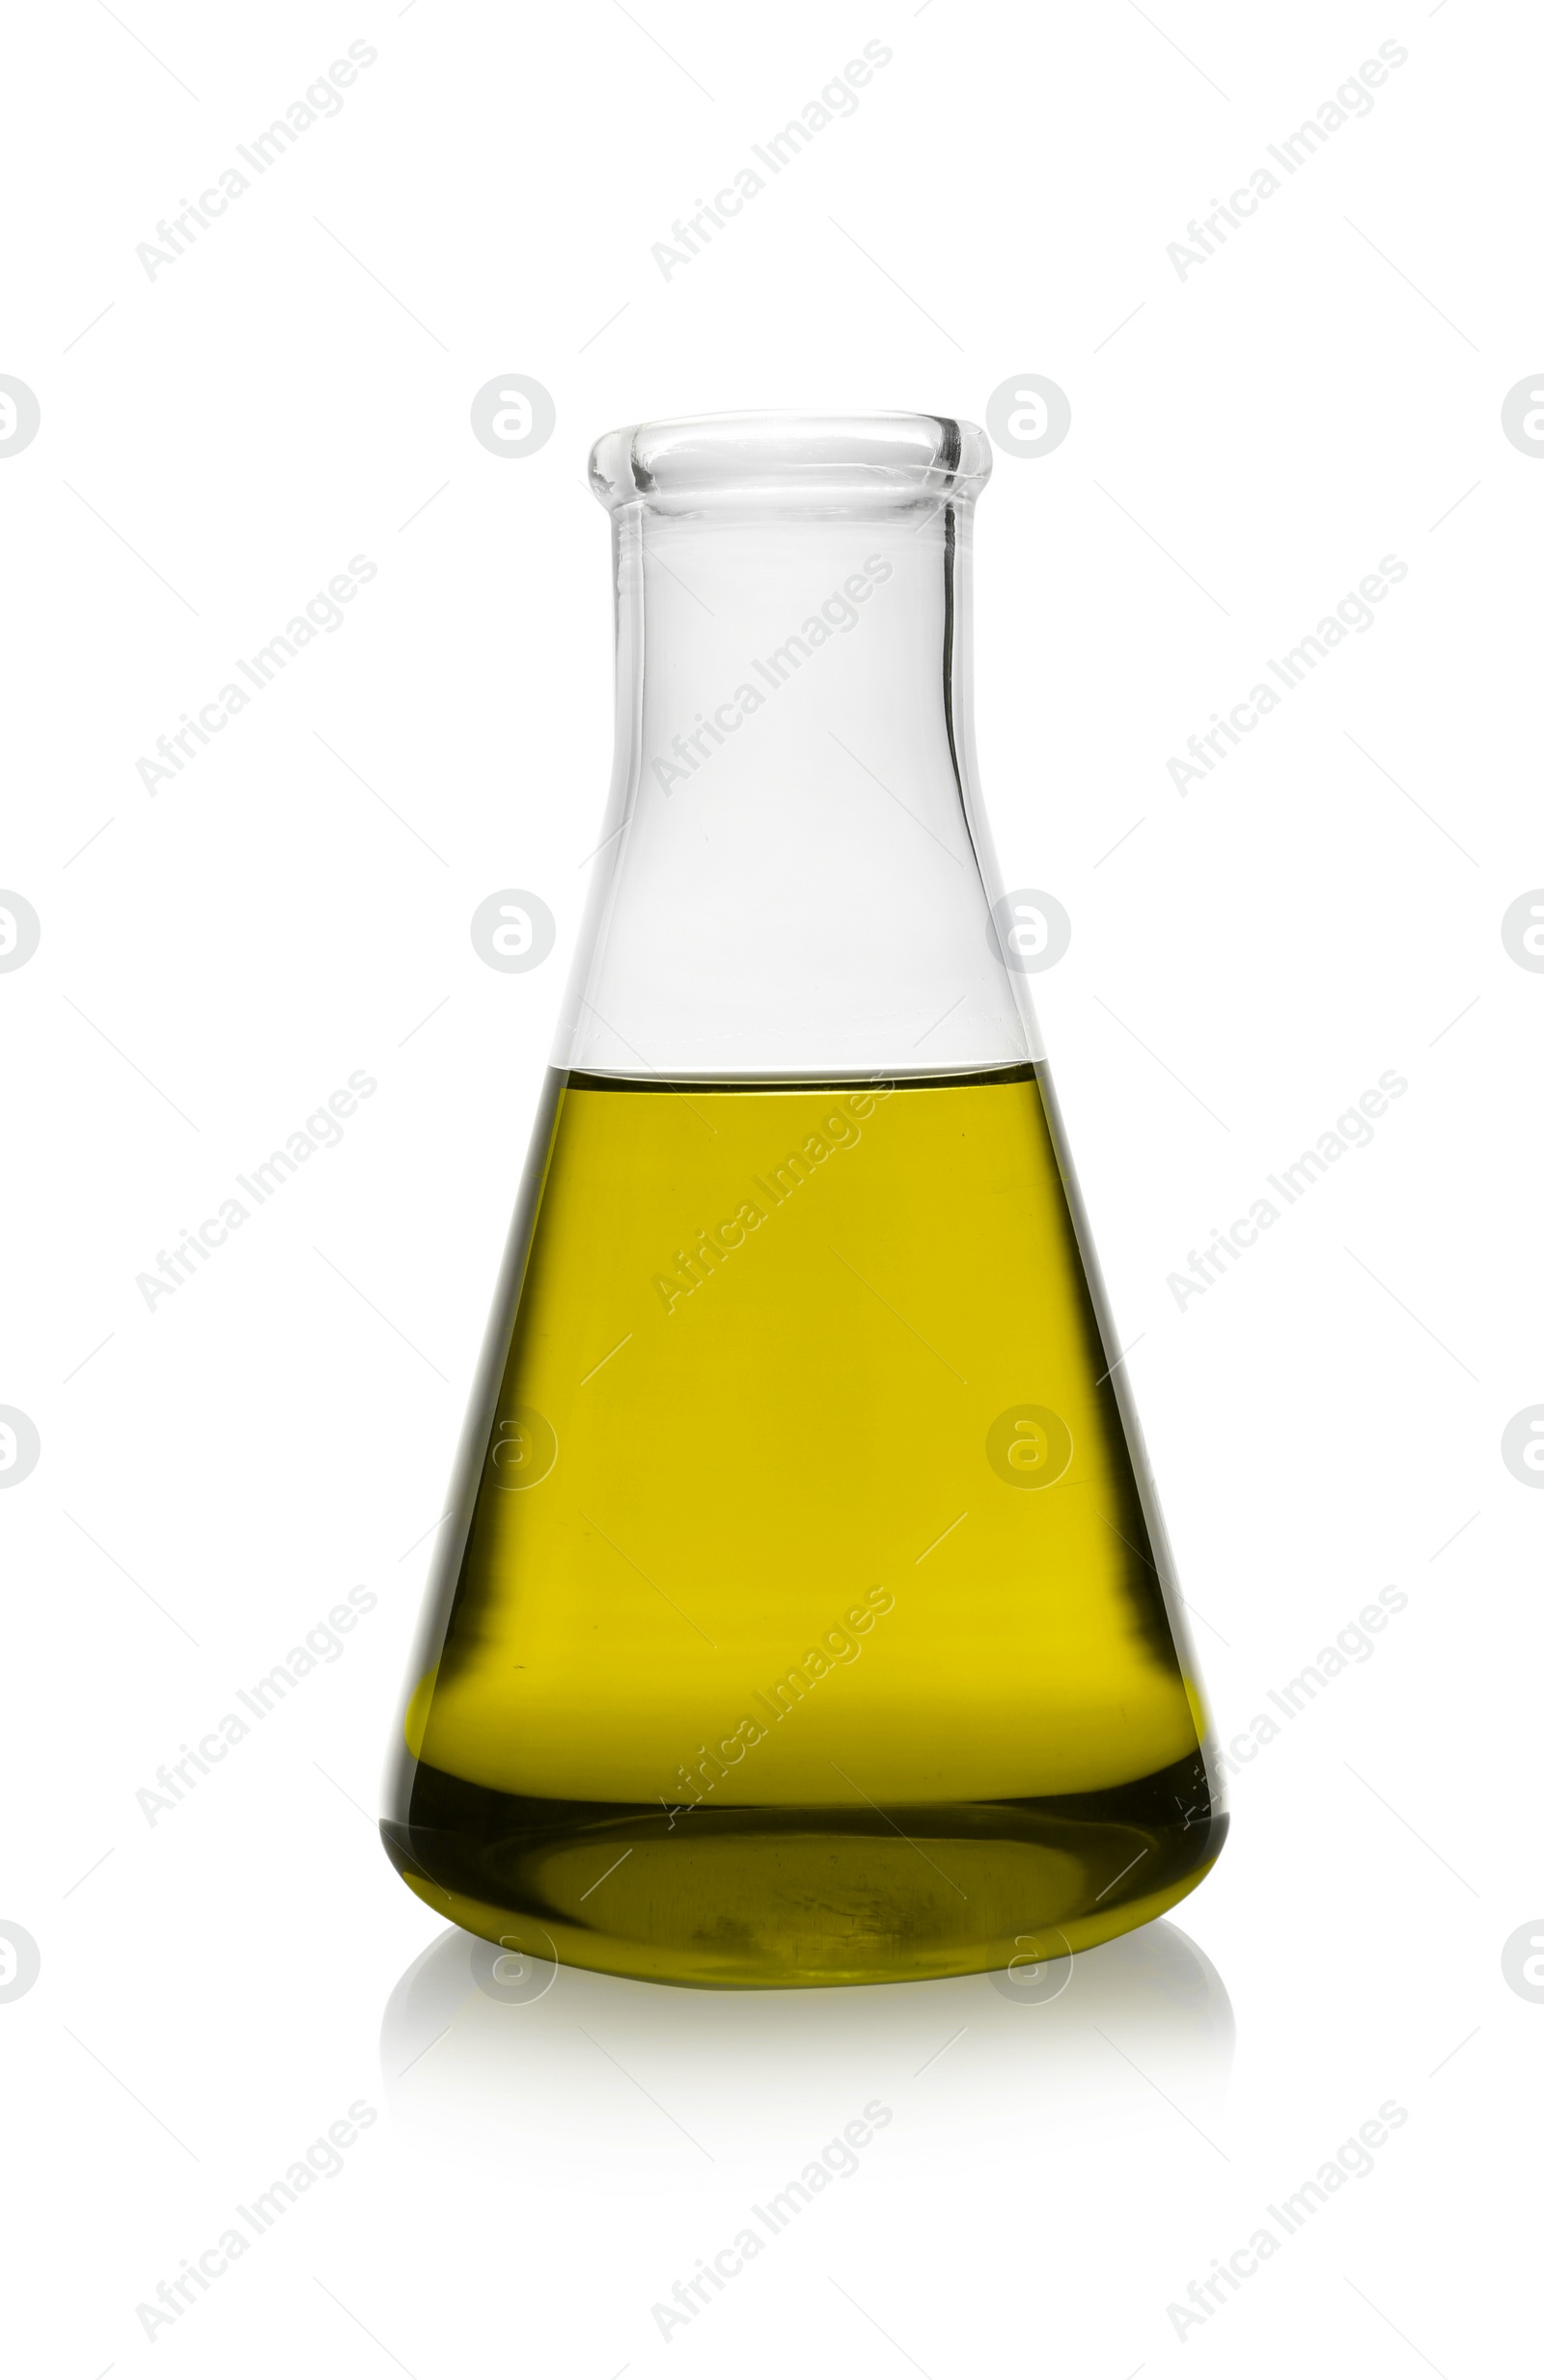 Image of Conical flask with yellow liquid isolated on white. Laboratory glassware